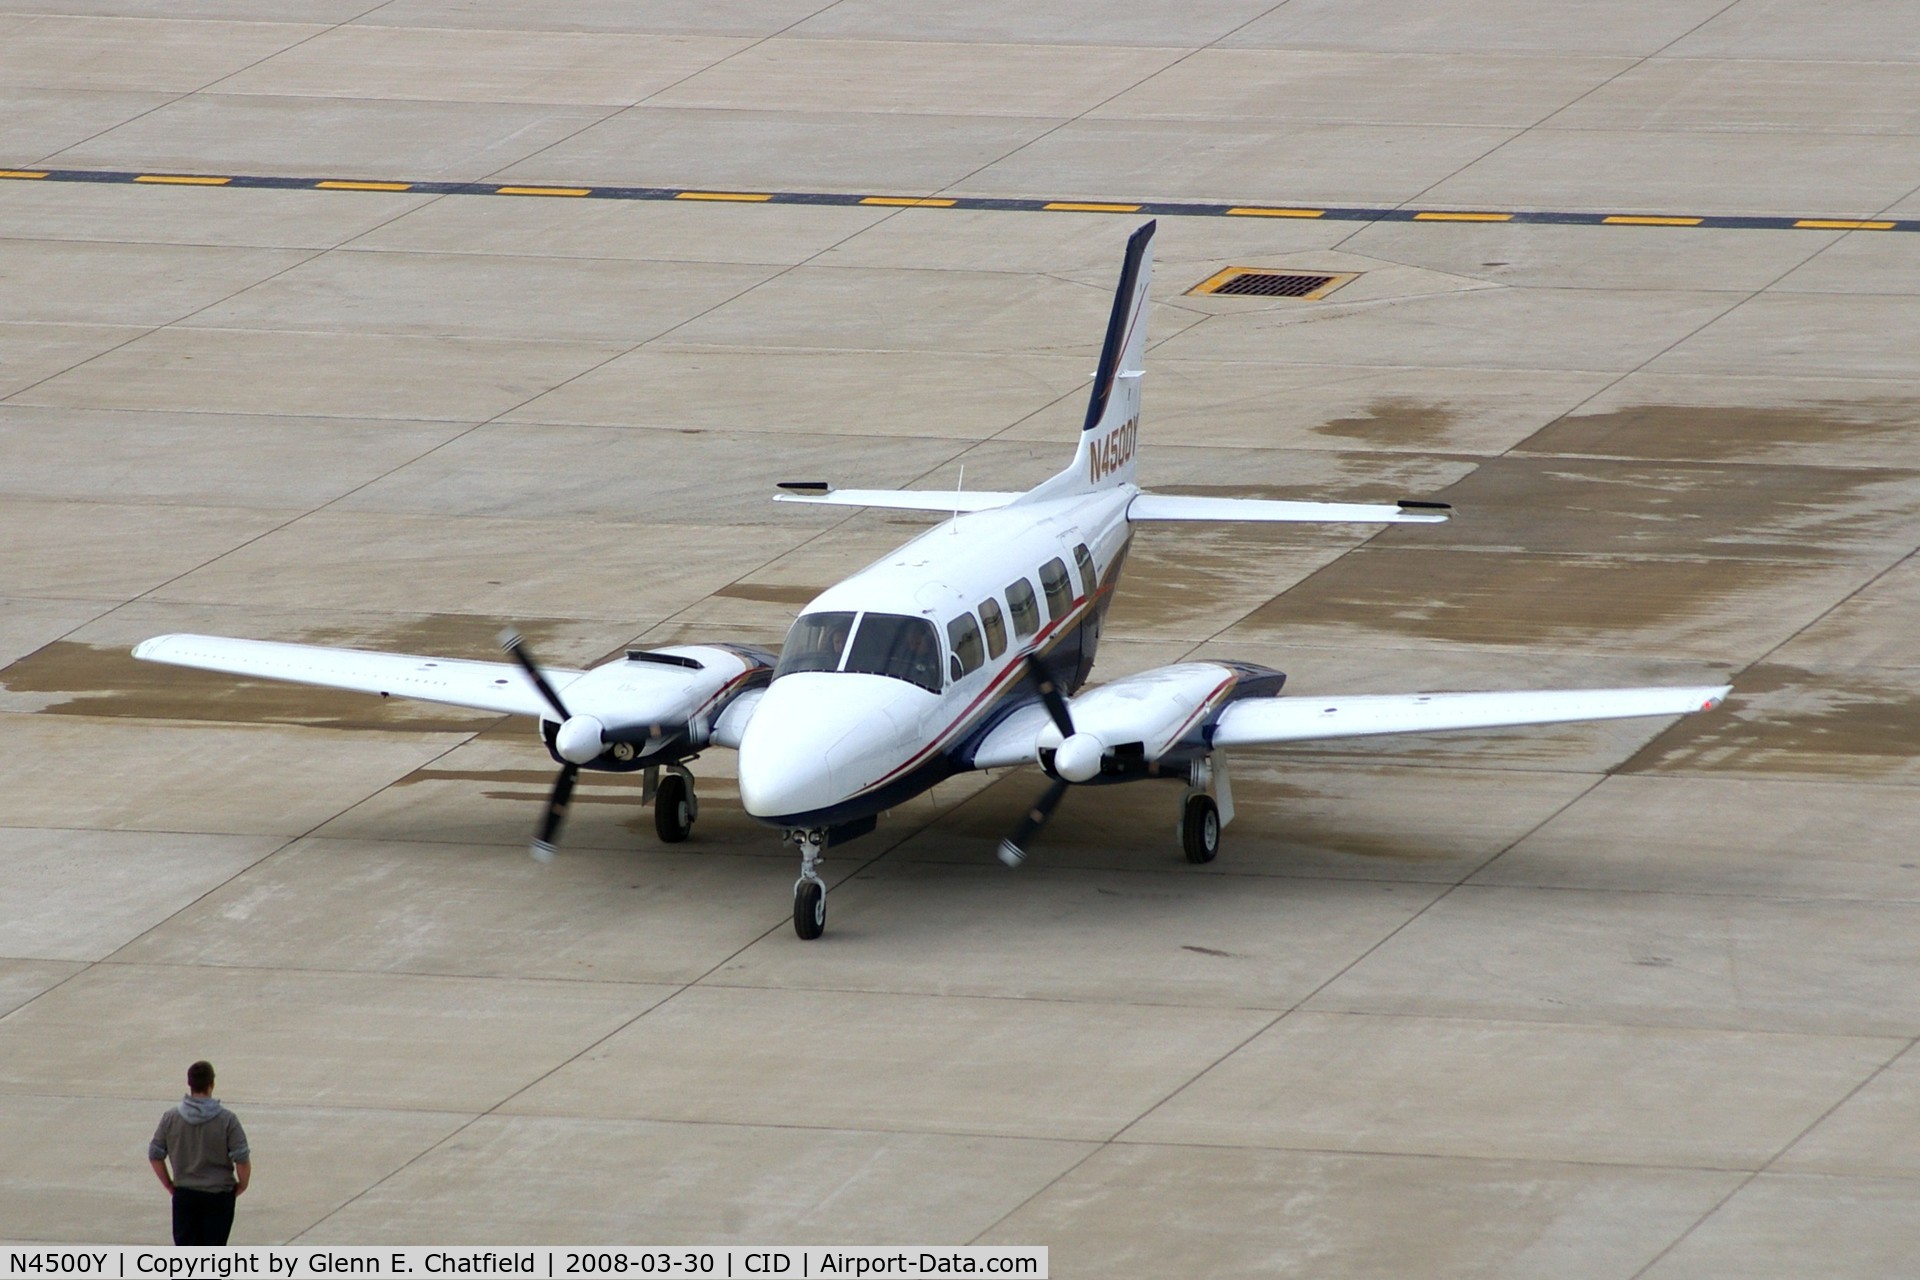 N4500Y, 1980 Piper PA-31-350 Chieftain C/N 31-8052160, Ready to taxi from Landmark